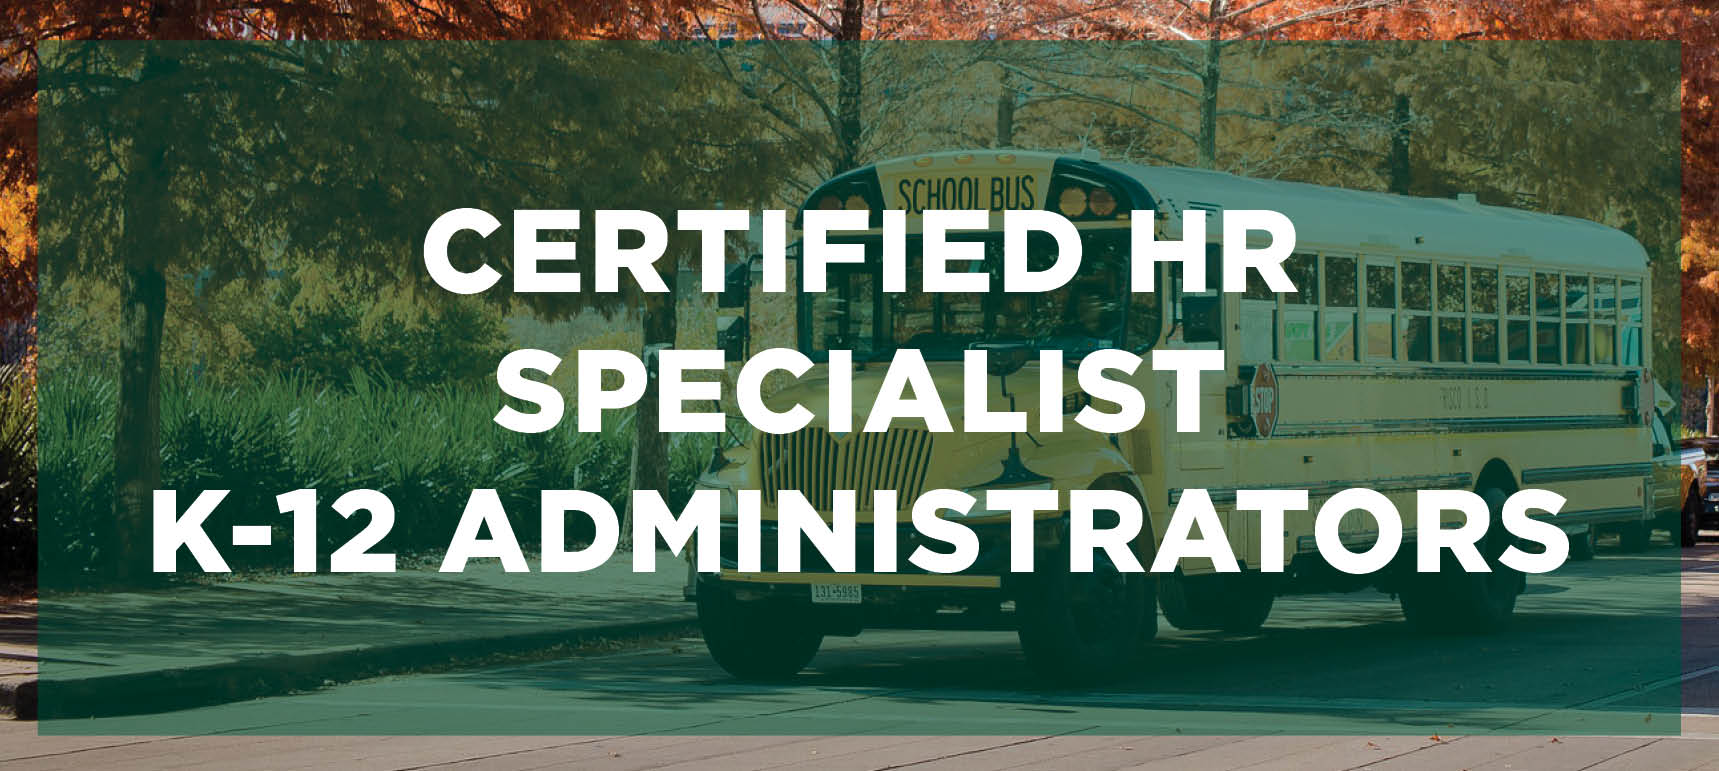 Learn more about the Certified HR Specialist for K-12 Administrators program